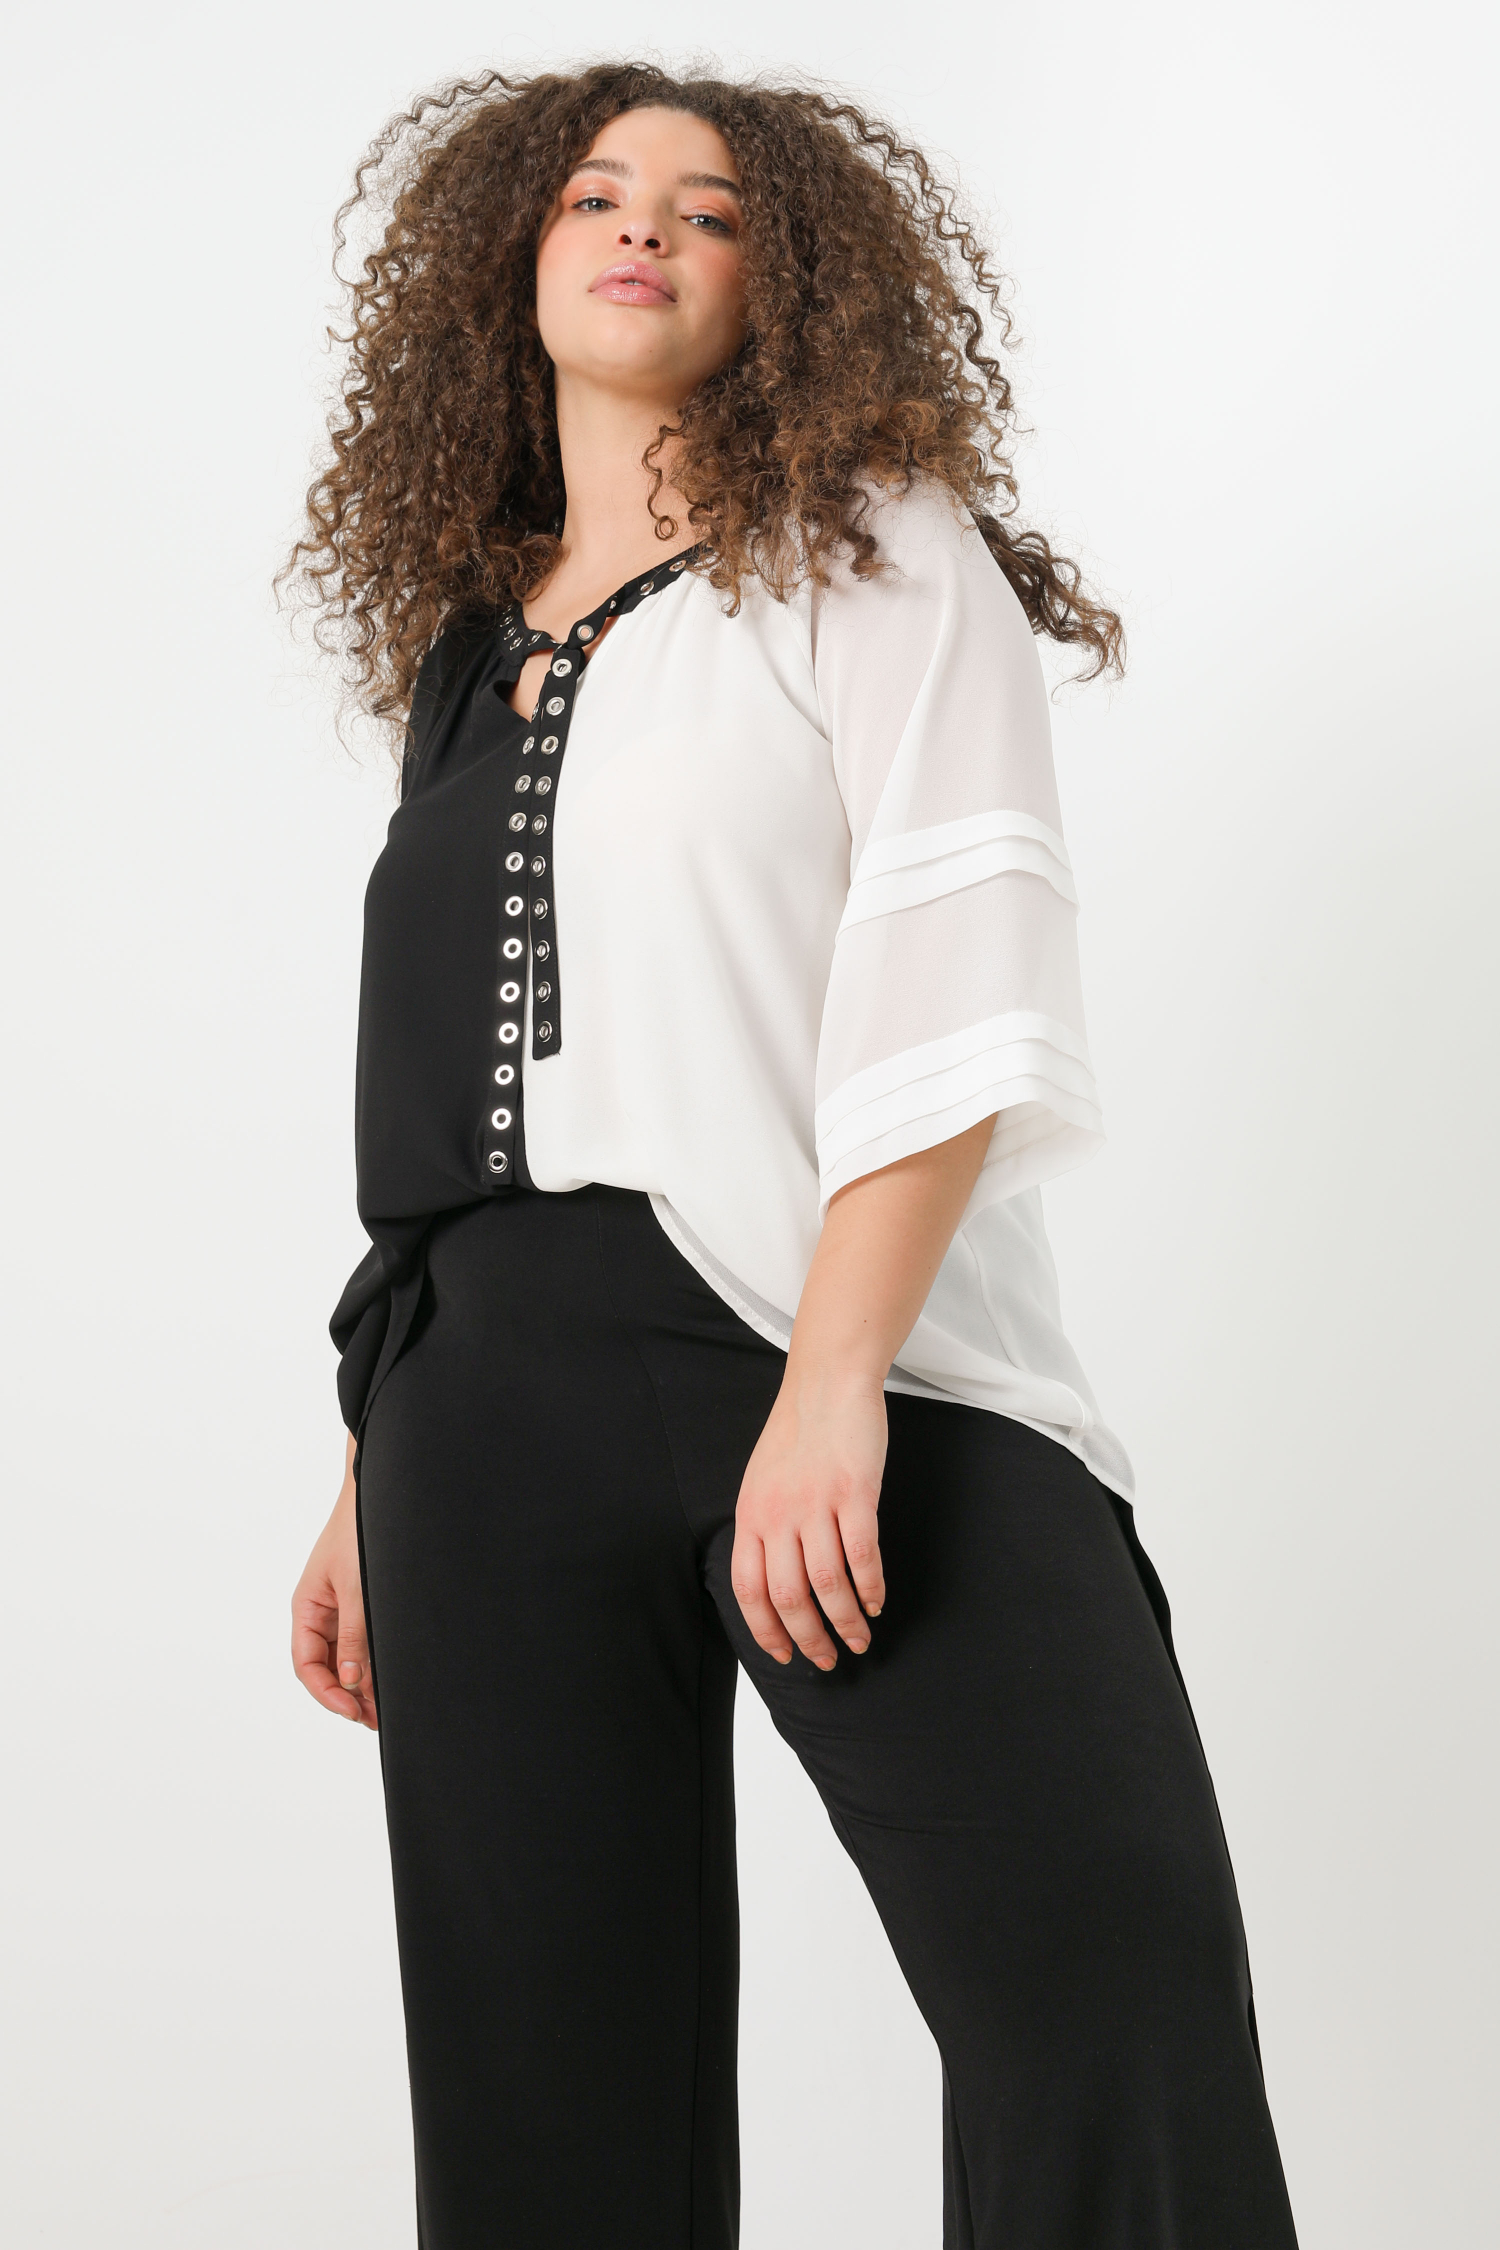 Black / white two-tone veil blouse with eyelets (shipping January 25/31)